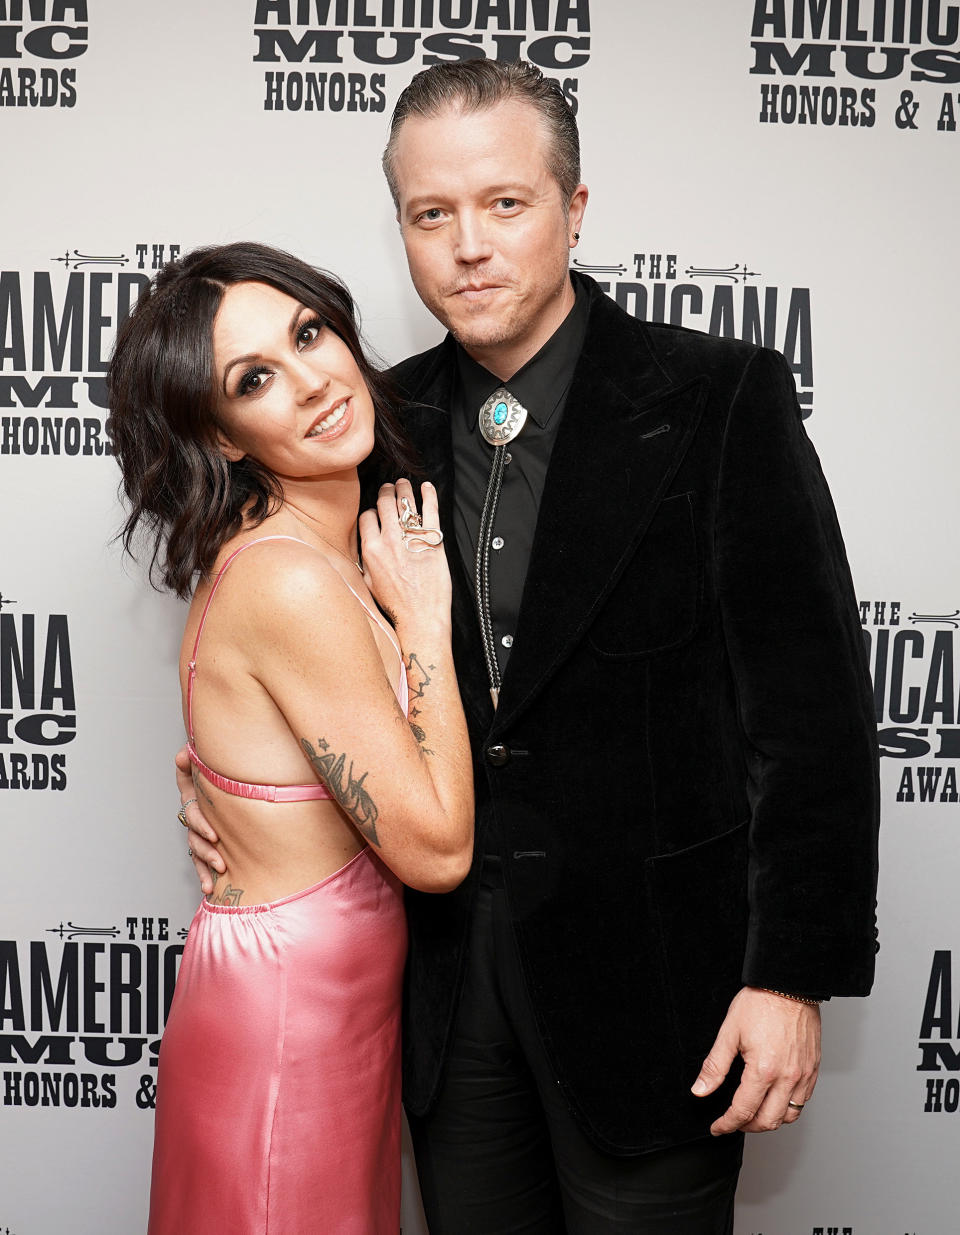 Amanda Shires and Jason Isbell attend the 20th Annual Americana Honors & Awards in 2021. (Photo: Erika Goldring/Getty Images for Americana Music Association)